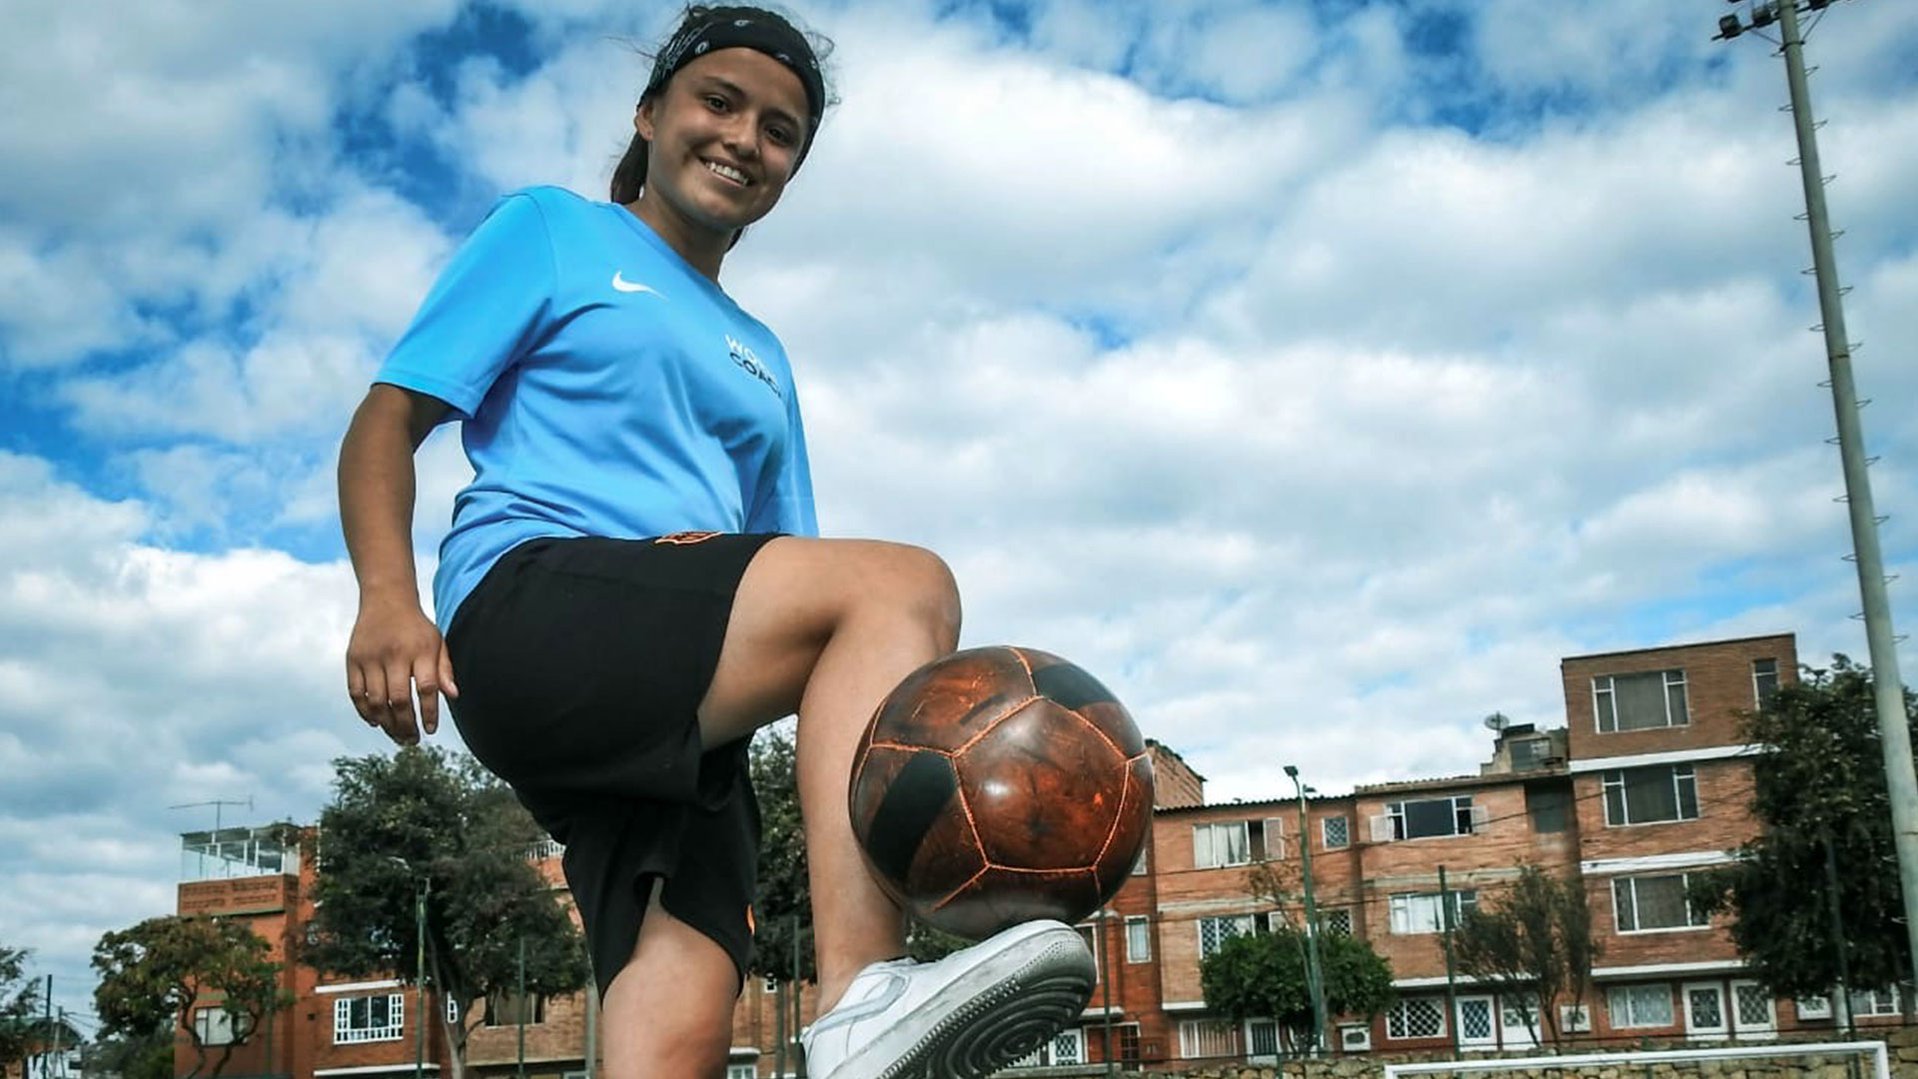 Annie uit Colombia, Bogotà doet mee aan ons voetbalproject 'Play it for live and future'